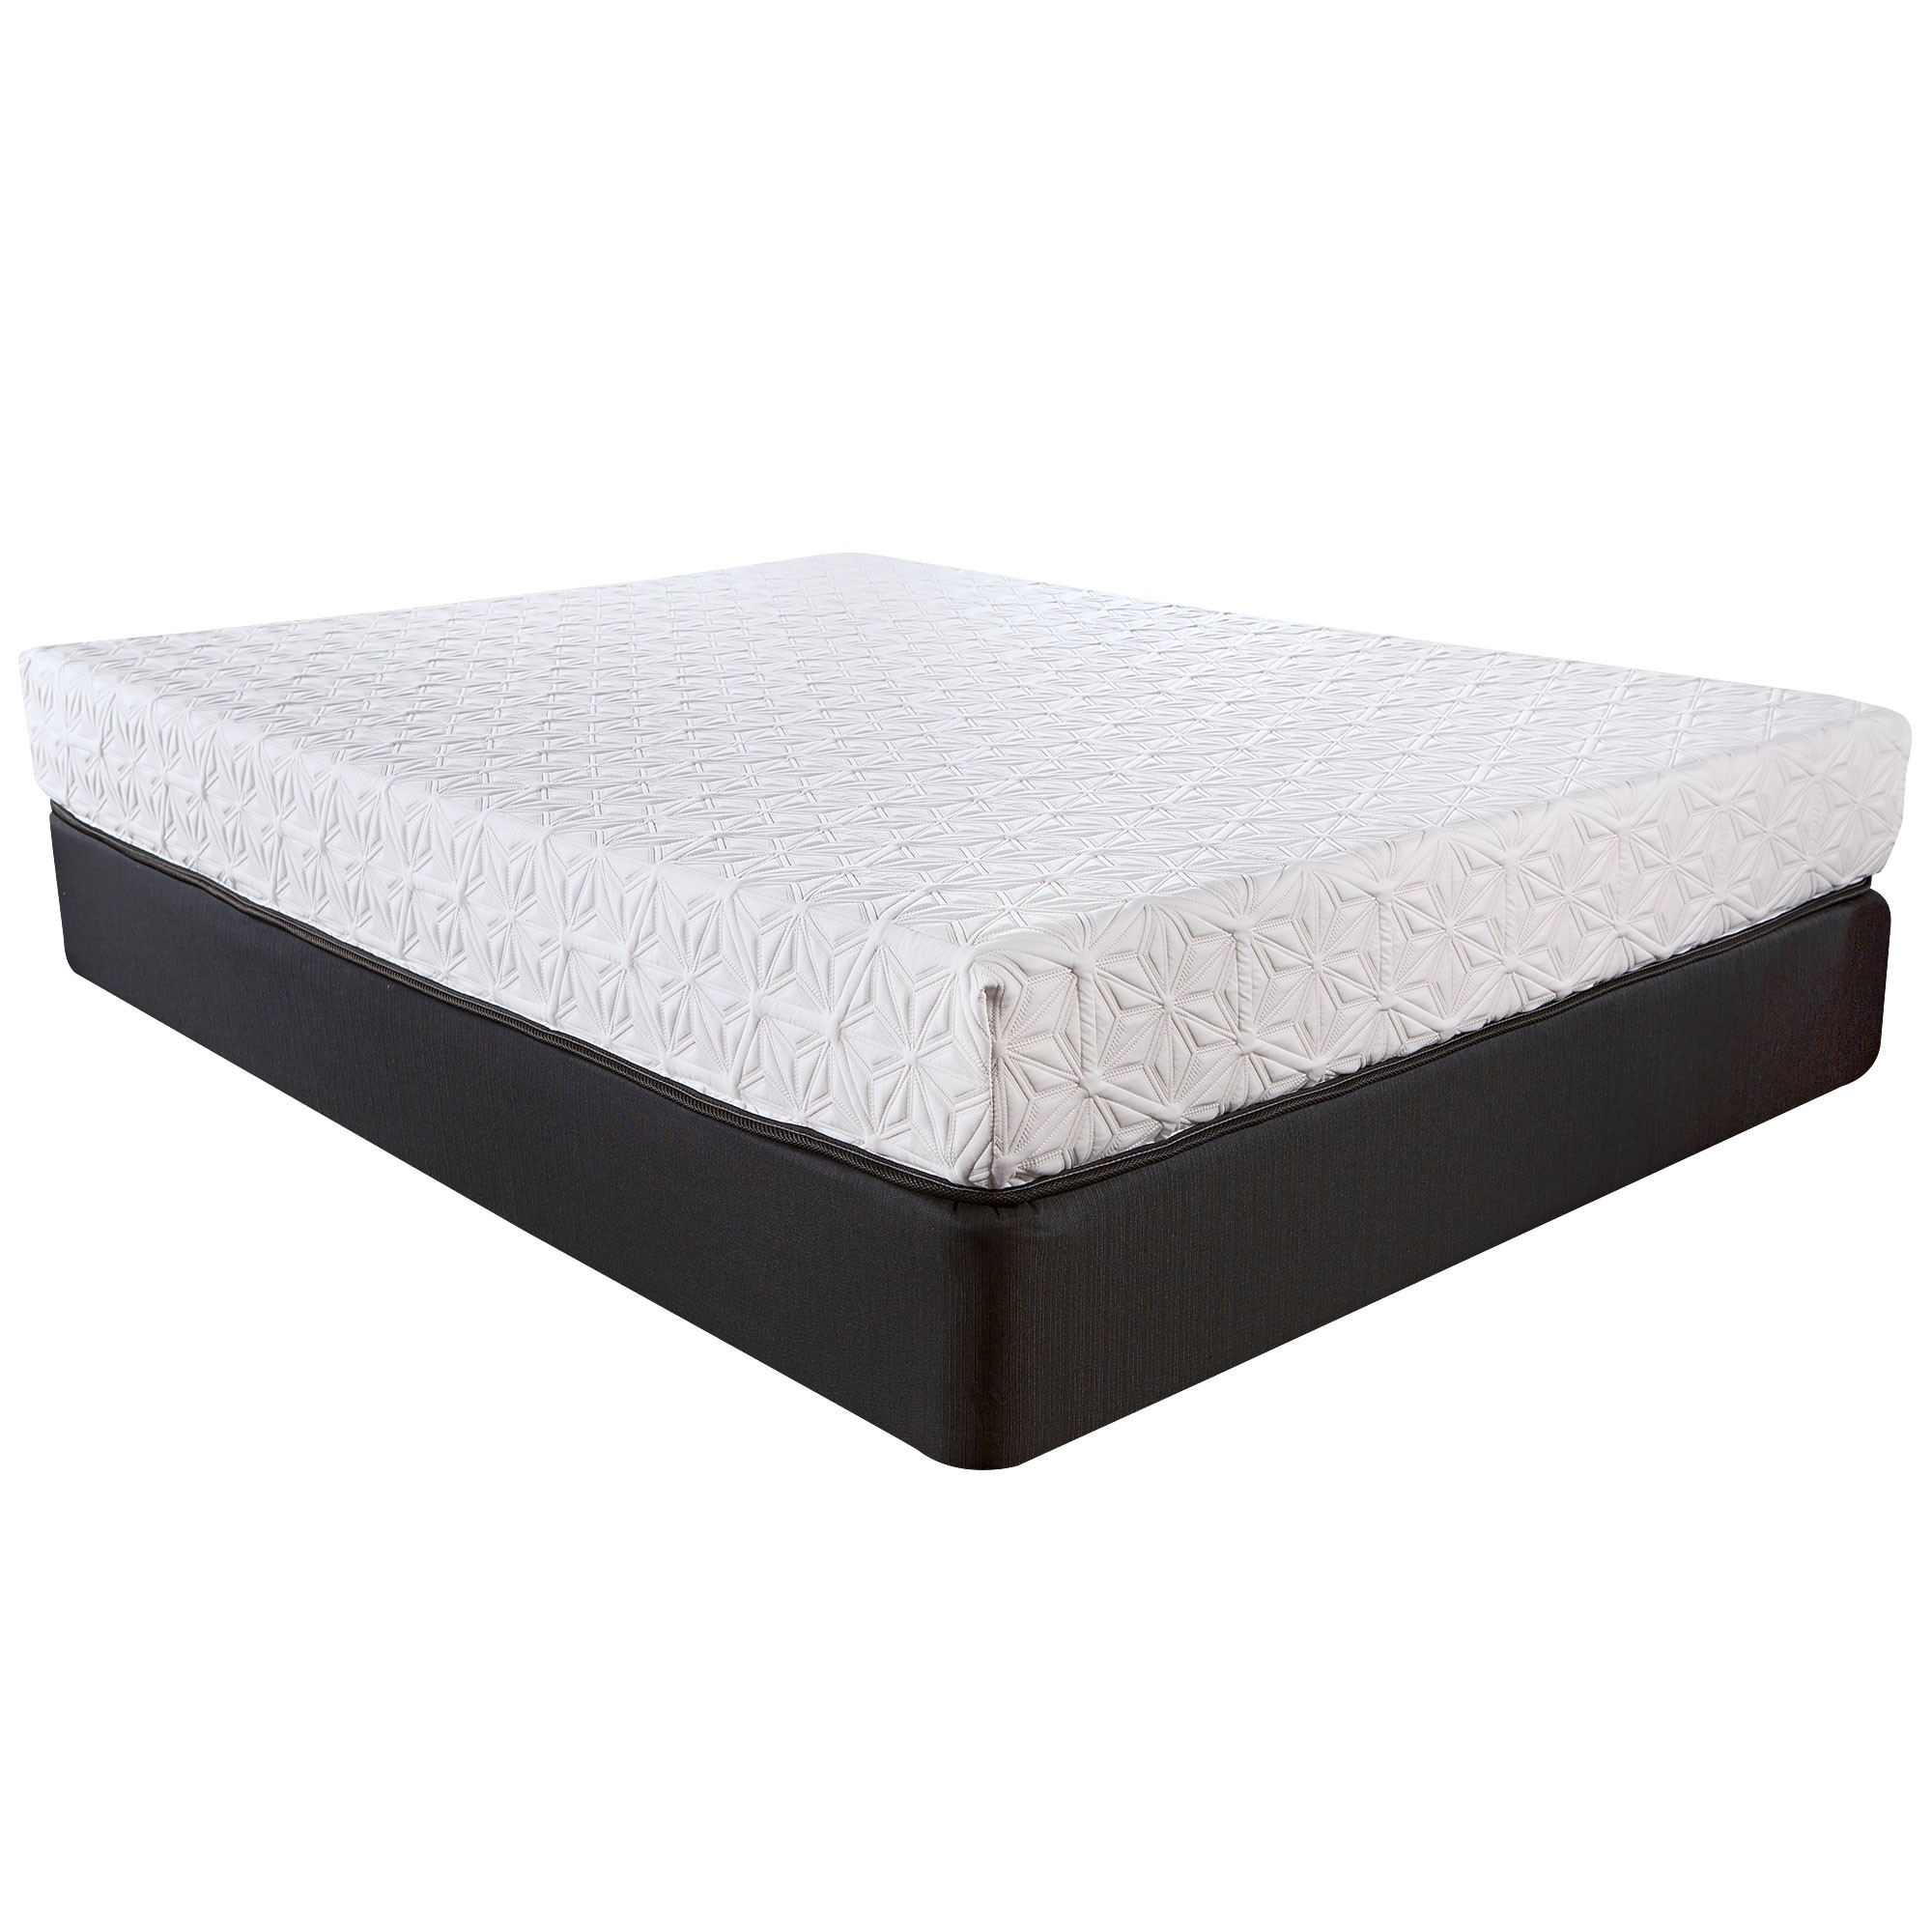 8 Inch Luxury Plush Gel Infused Memory Foam And Hd Support Foam Smooth Top Mattress-391614-1